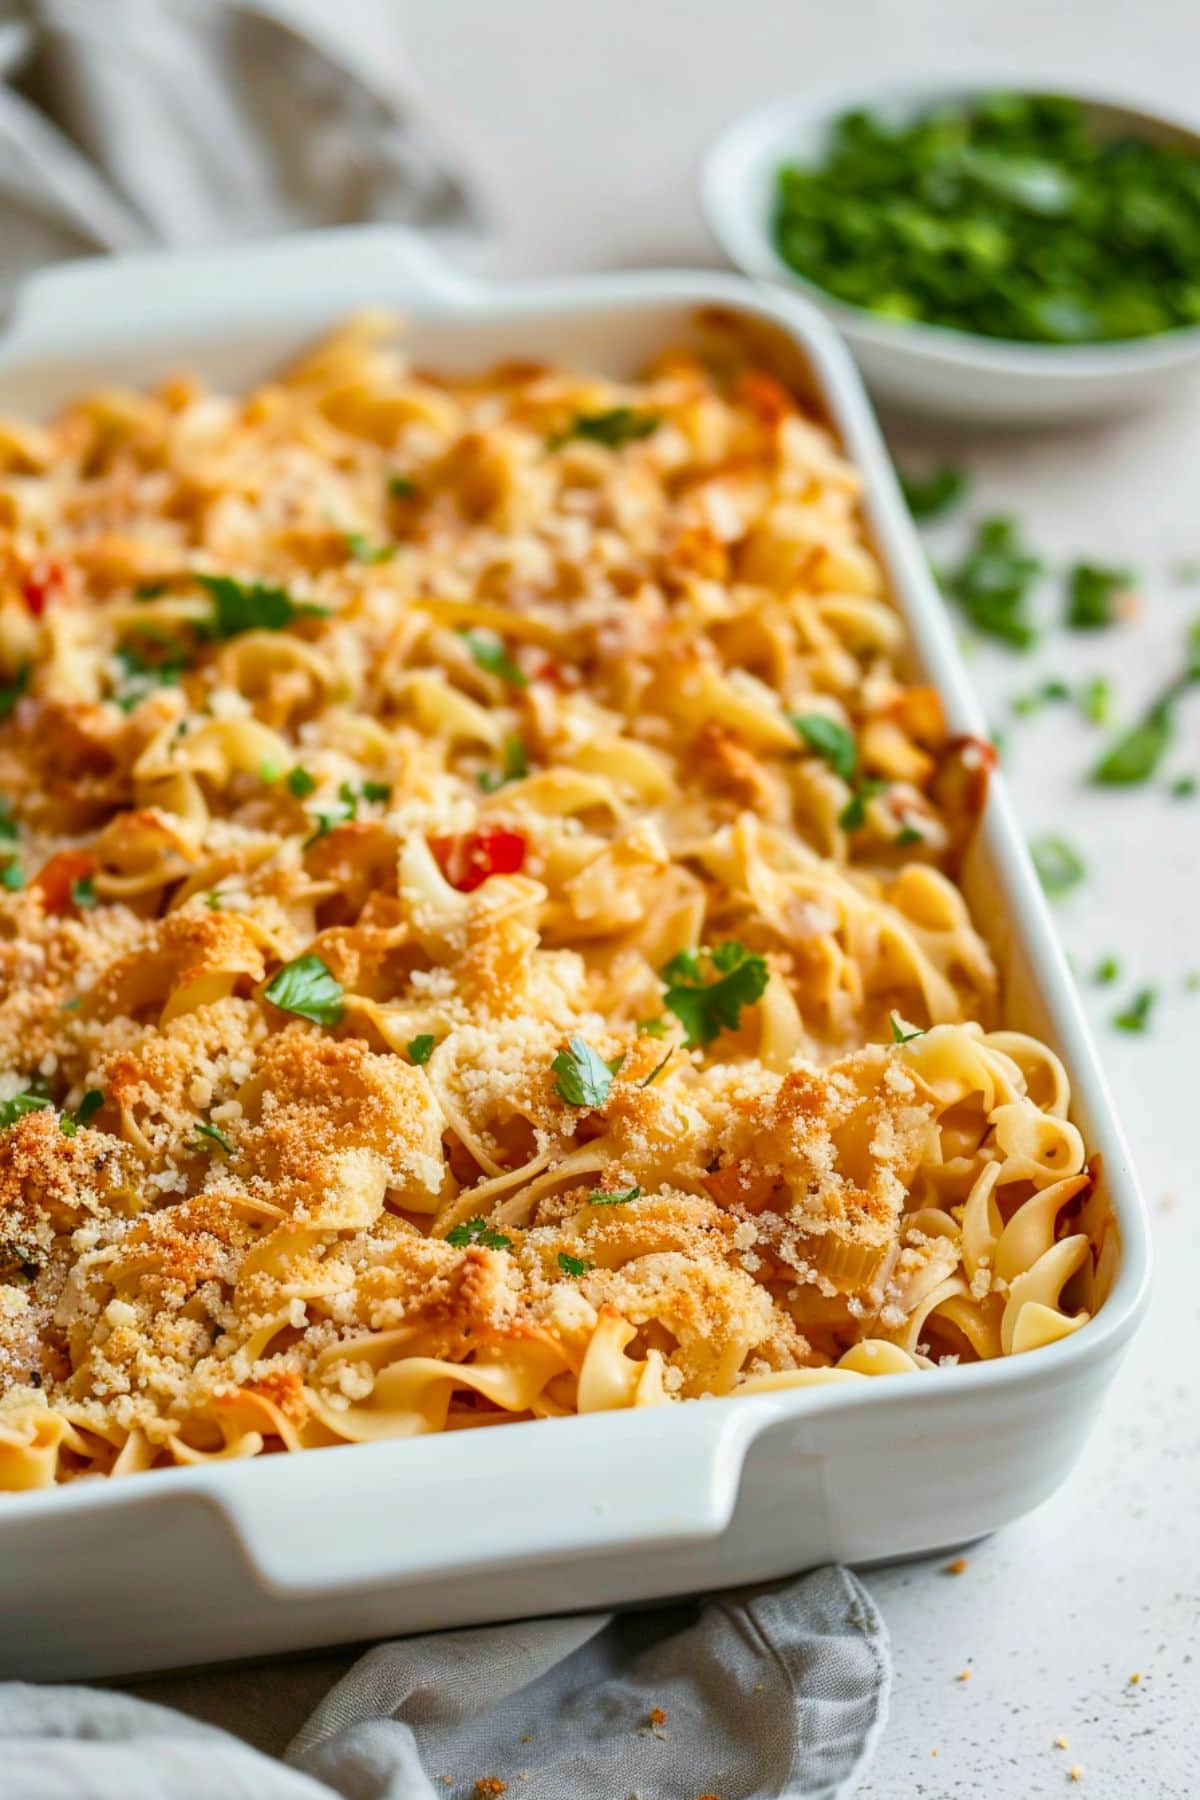 Turkey noodle casserole in a baking dish covered with bread crumbs.